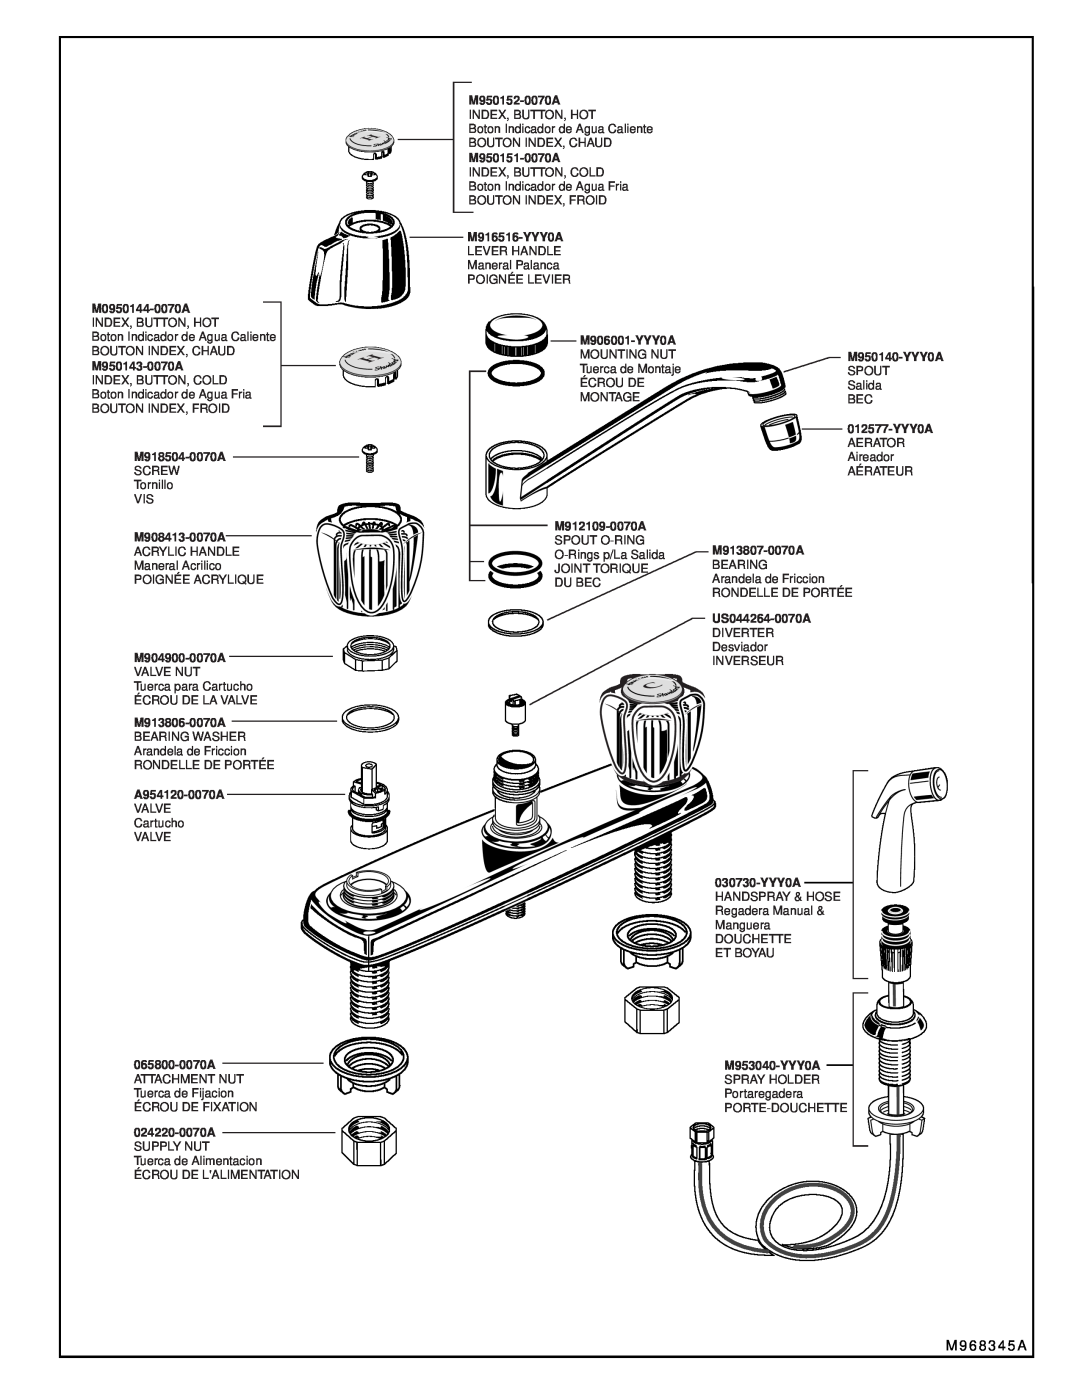 American Standard 4275.301, 4275.300, 4275.200, 4275.201 installation instructions M 9 6 8 3 4 5 A, M950152-0070A 